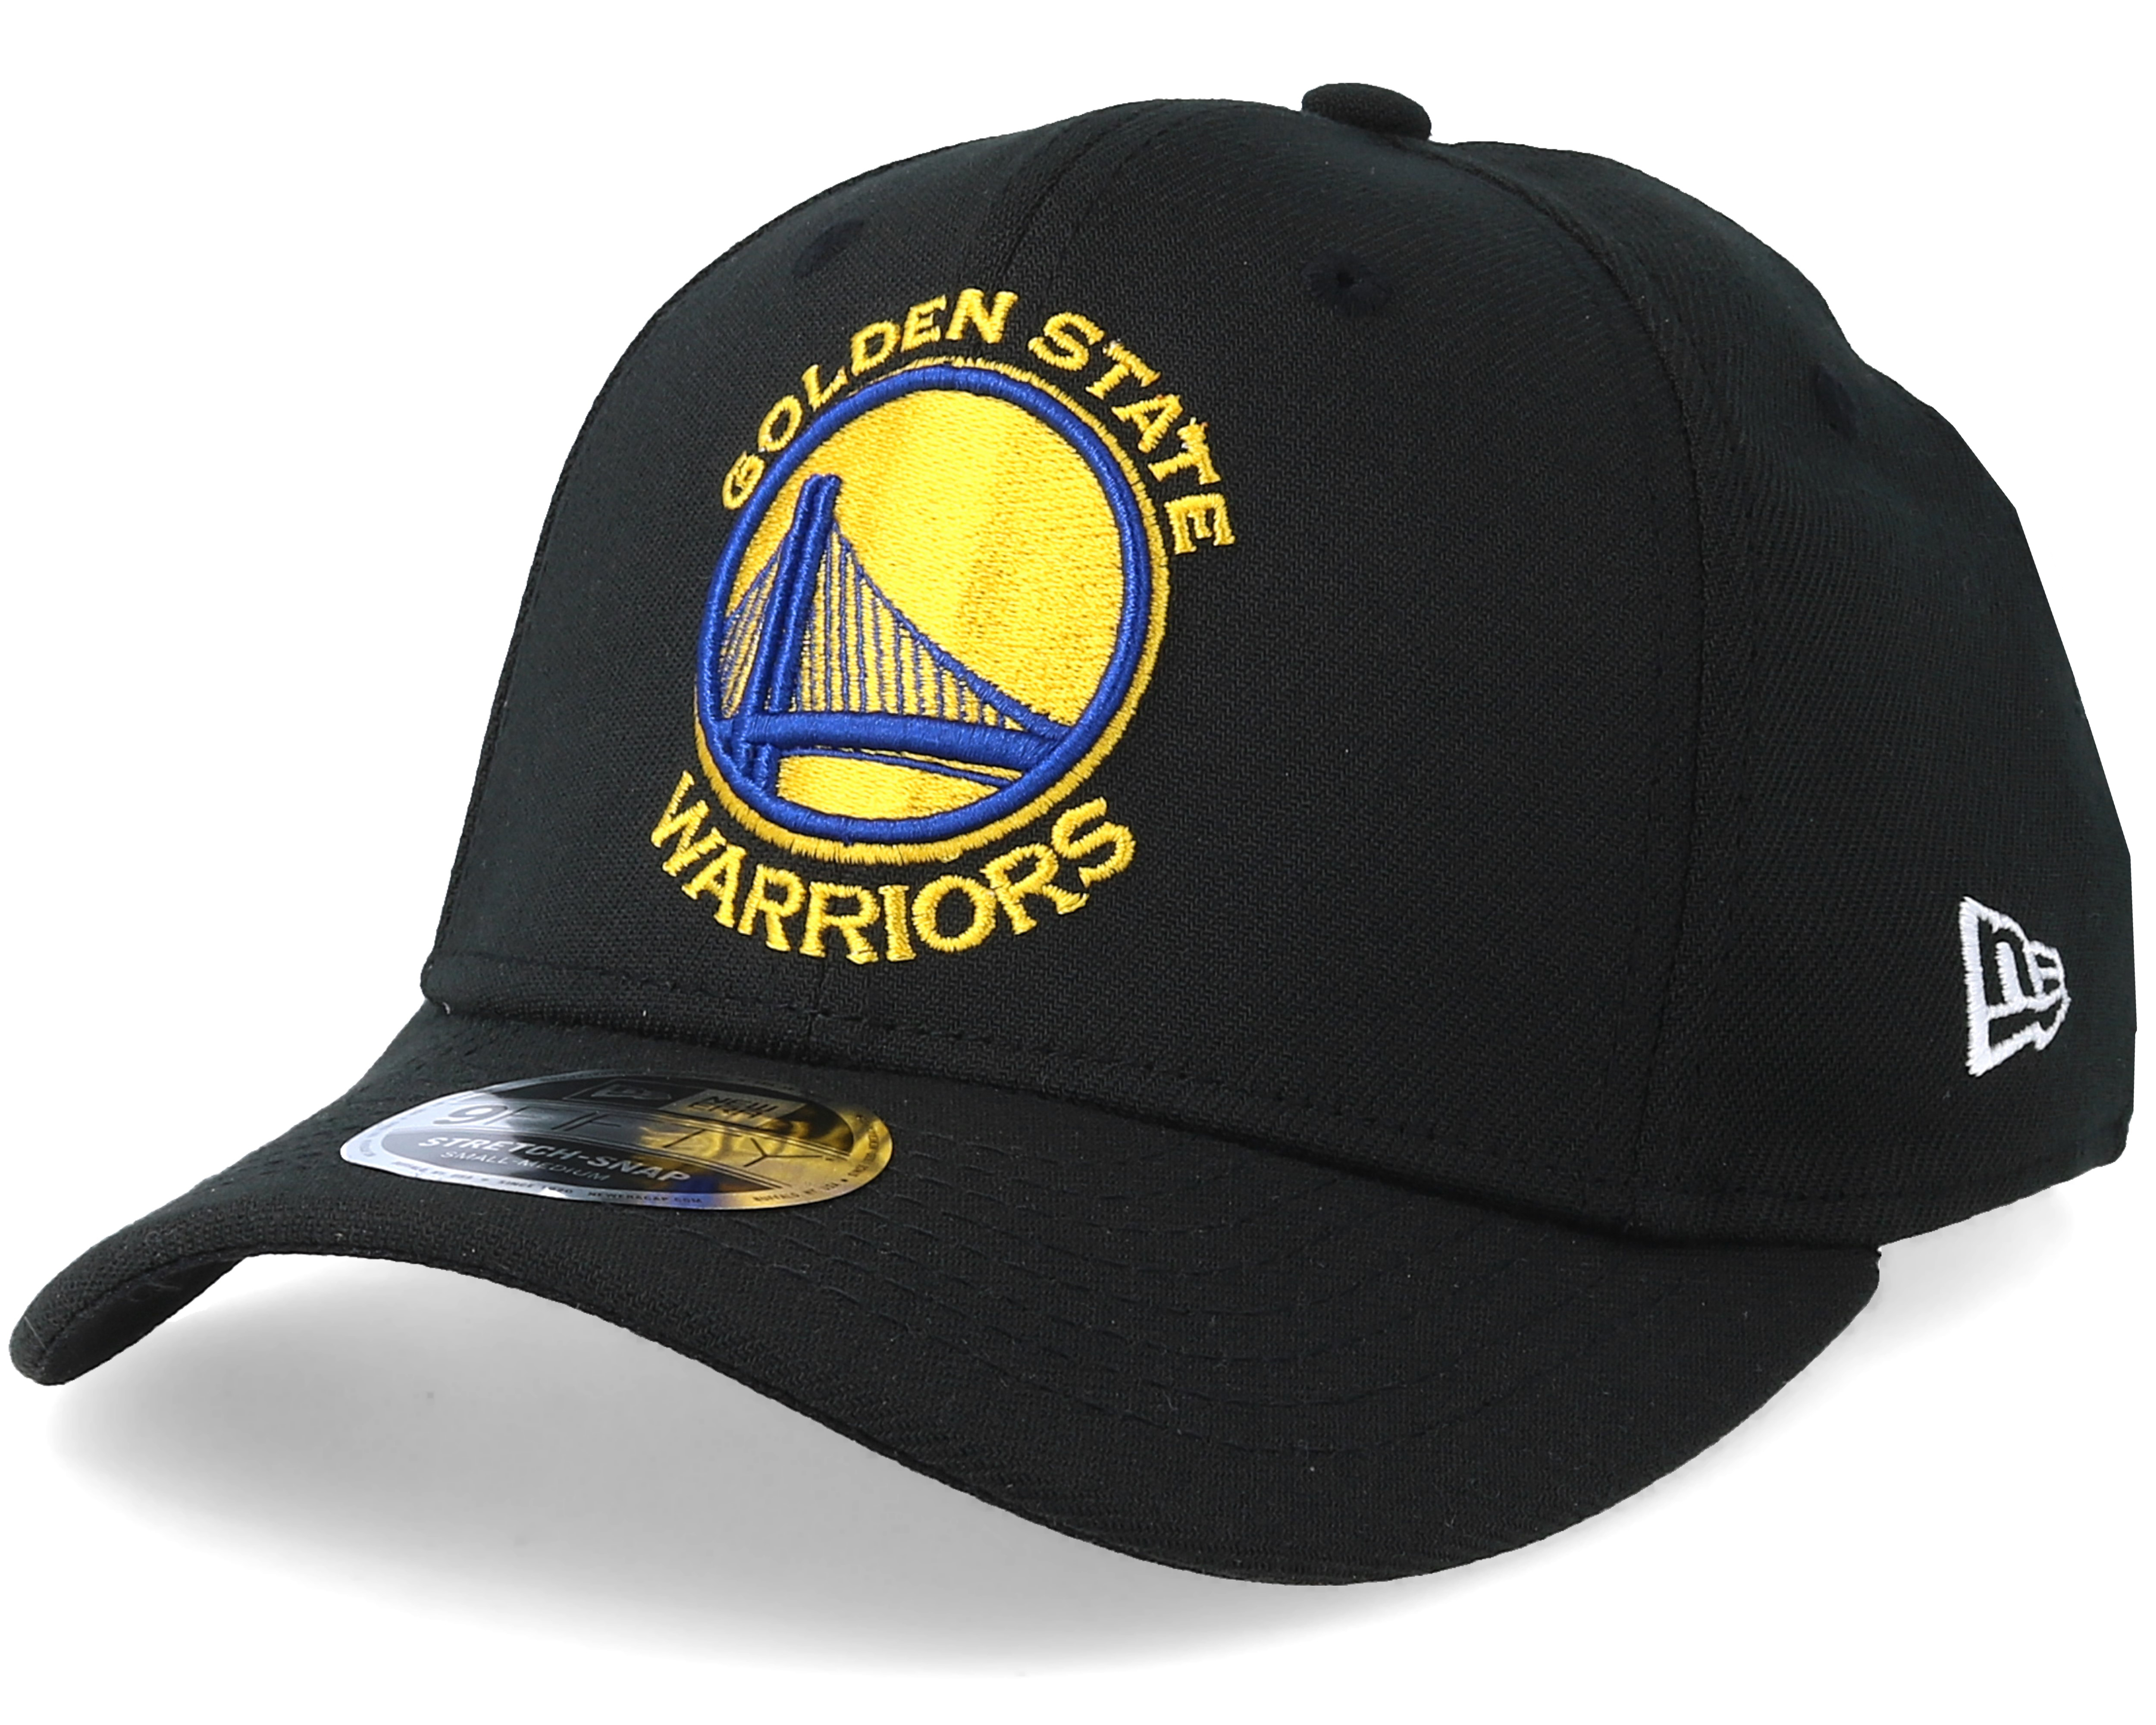 Golden State Warrior Stretch Snap 9Fifty Black/Gold/Blue Snapback- New ...